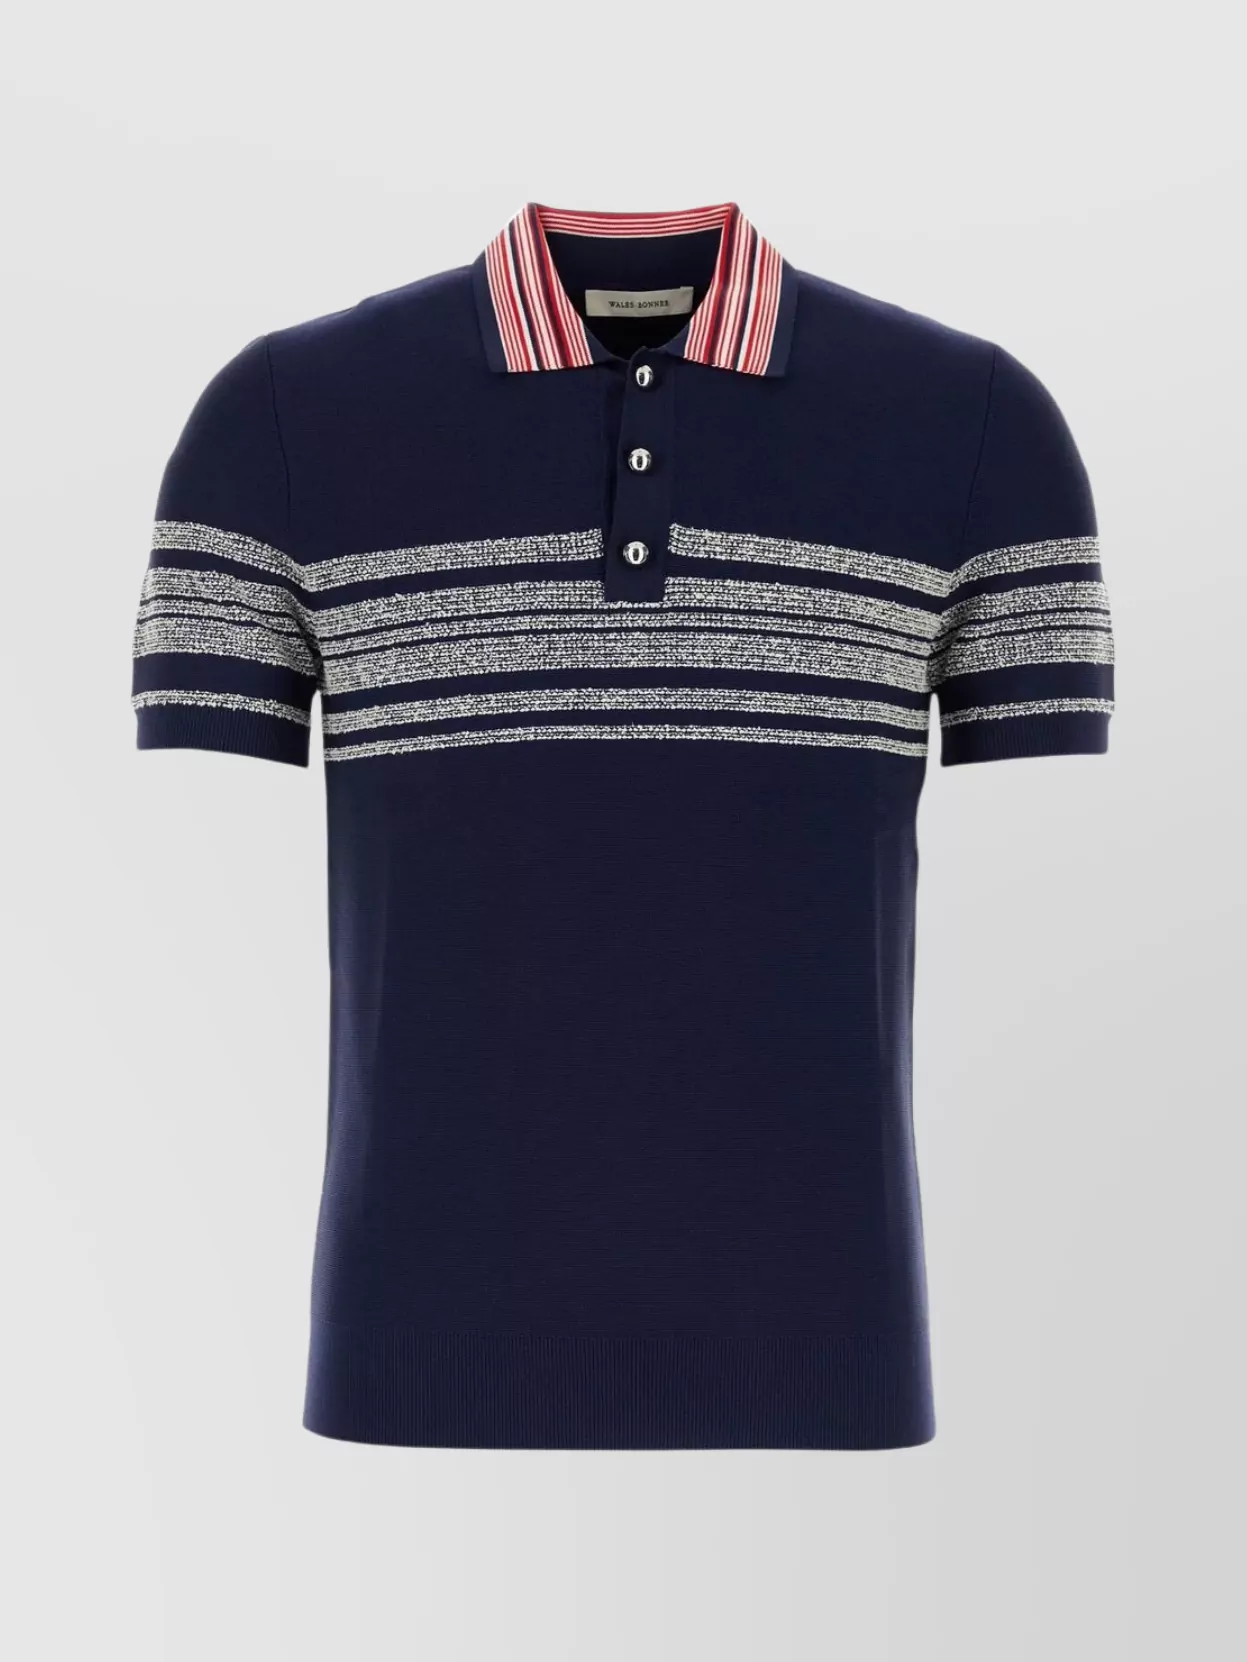 Shop Wales Bonner Dawn Knit Polo Shirt With Striped Embroidery